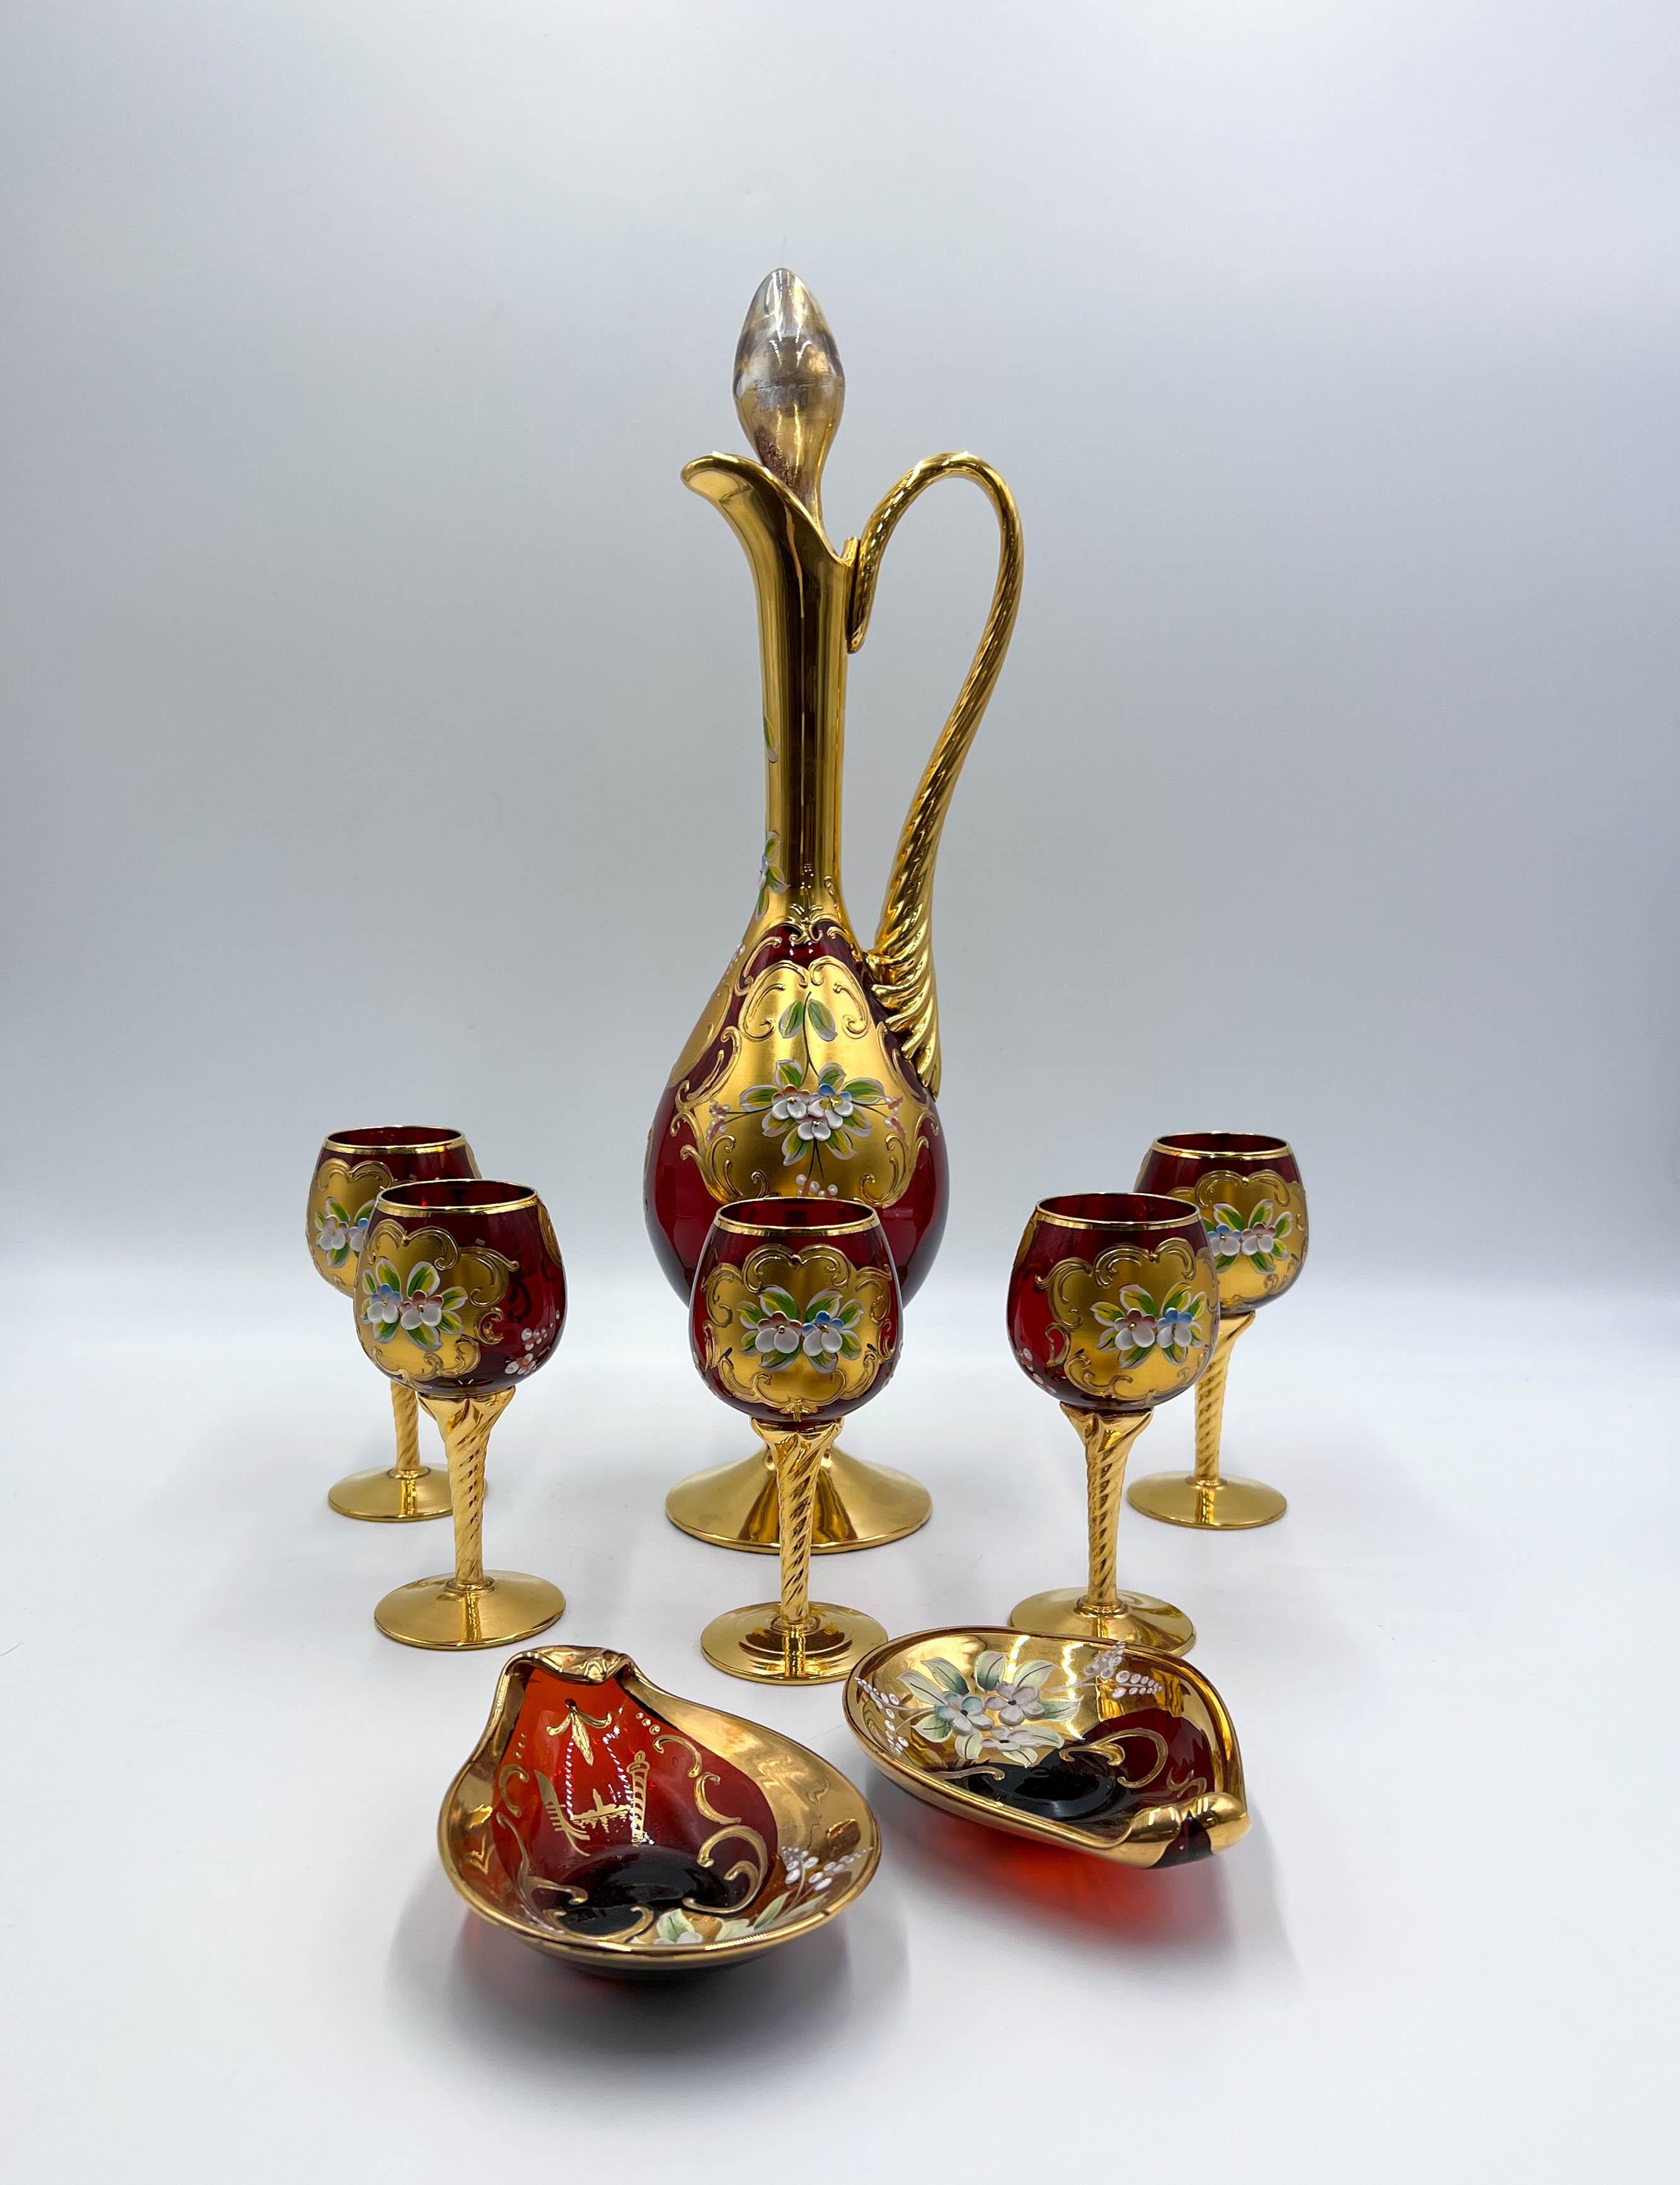 This Tre Fuochi Italian Venetian Murano hand-blown art glass set is a true testament to the artistry and craftsmanship of the ancient Venetian tradition. This exquisite set, crafted with meticulous attention to detail, showcases the splendor of